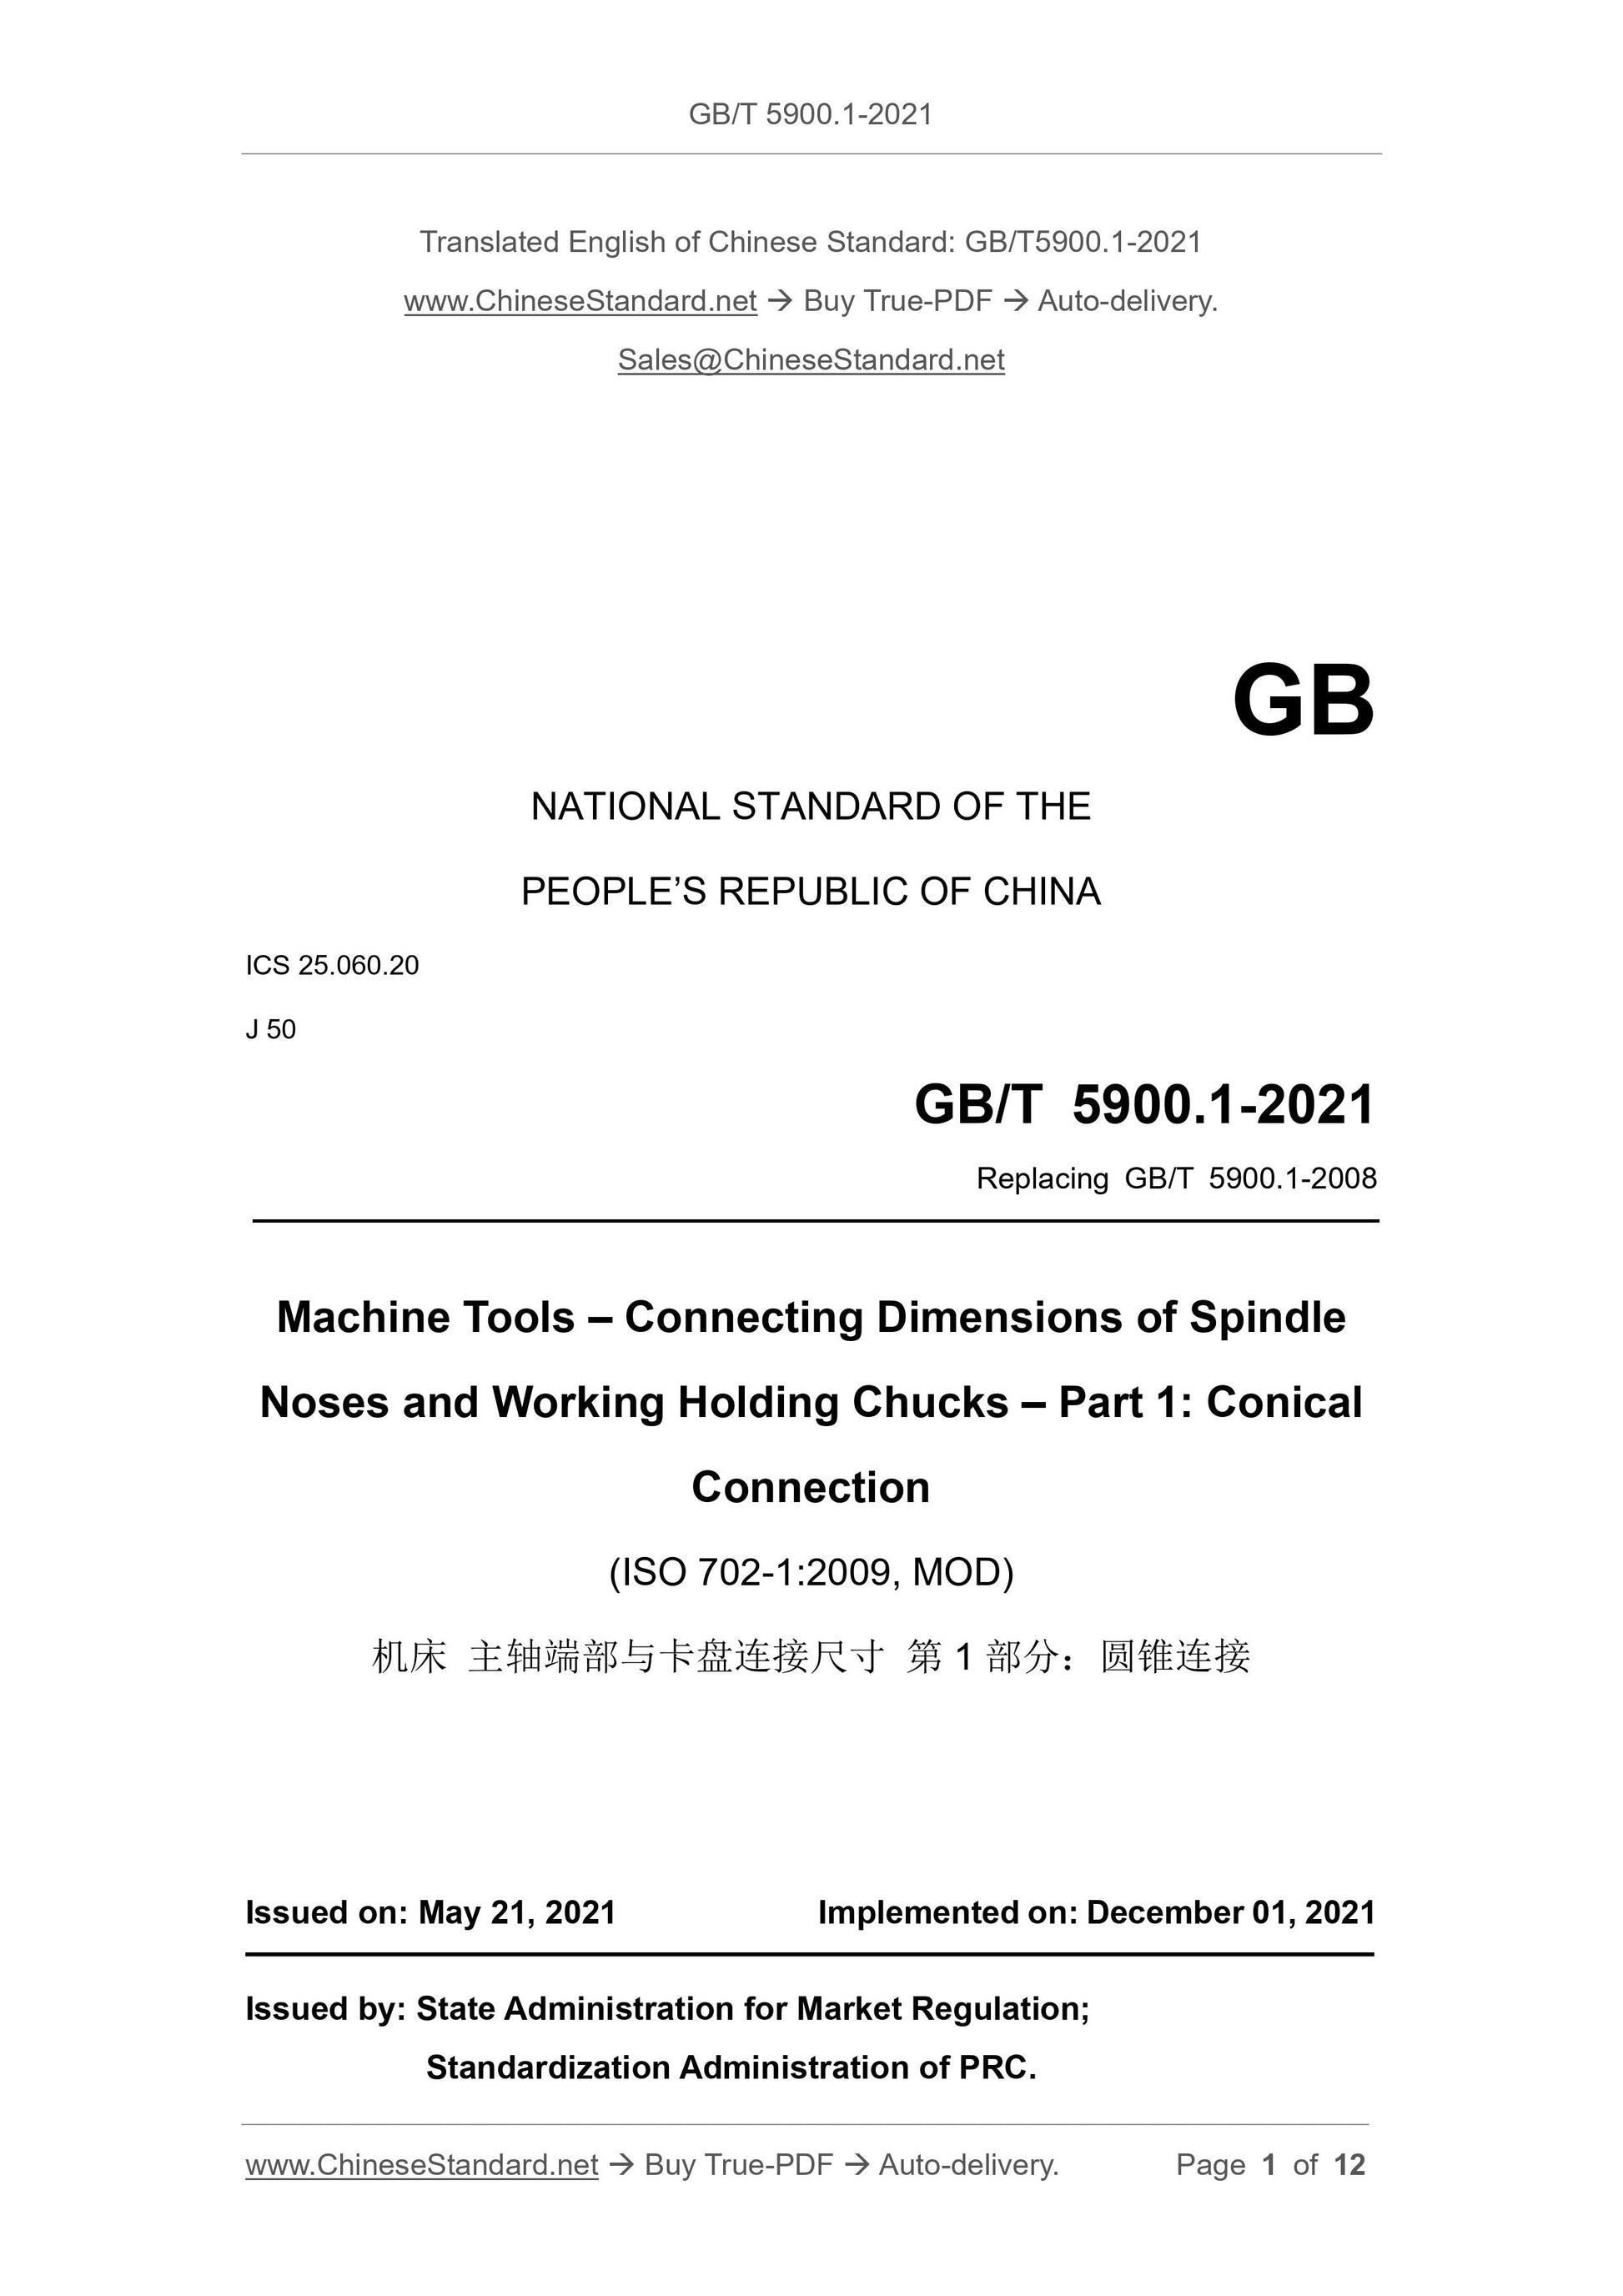 GB/T 5900.1-2021 Page 1